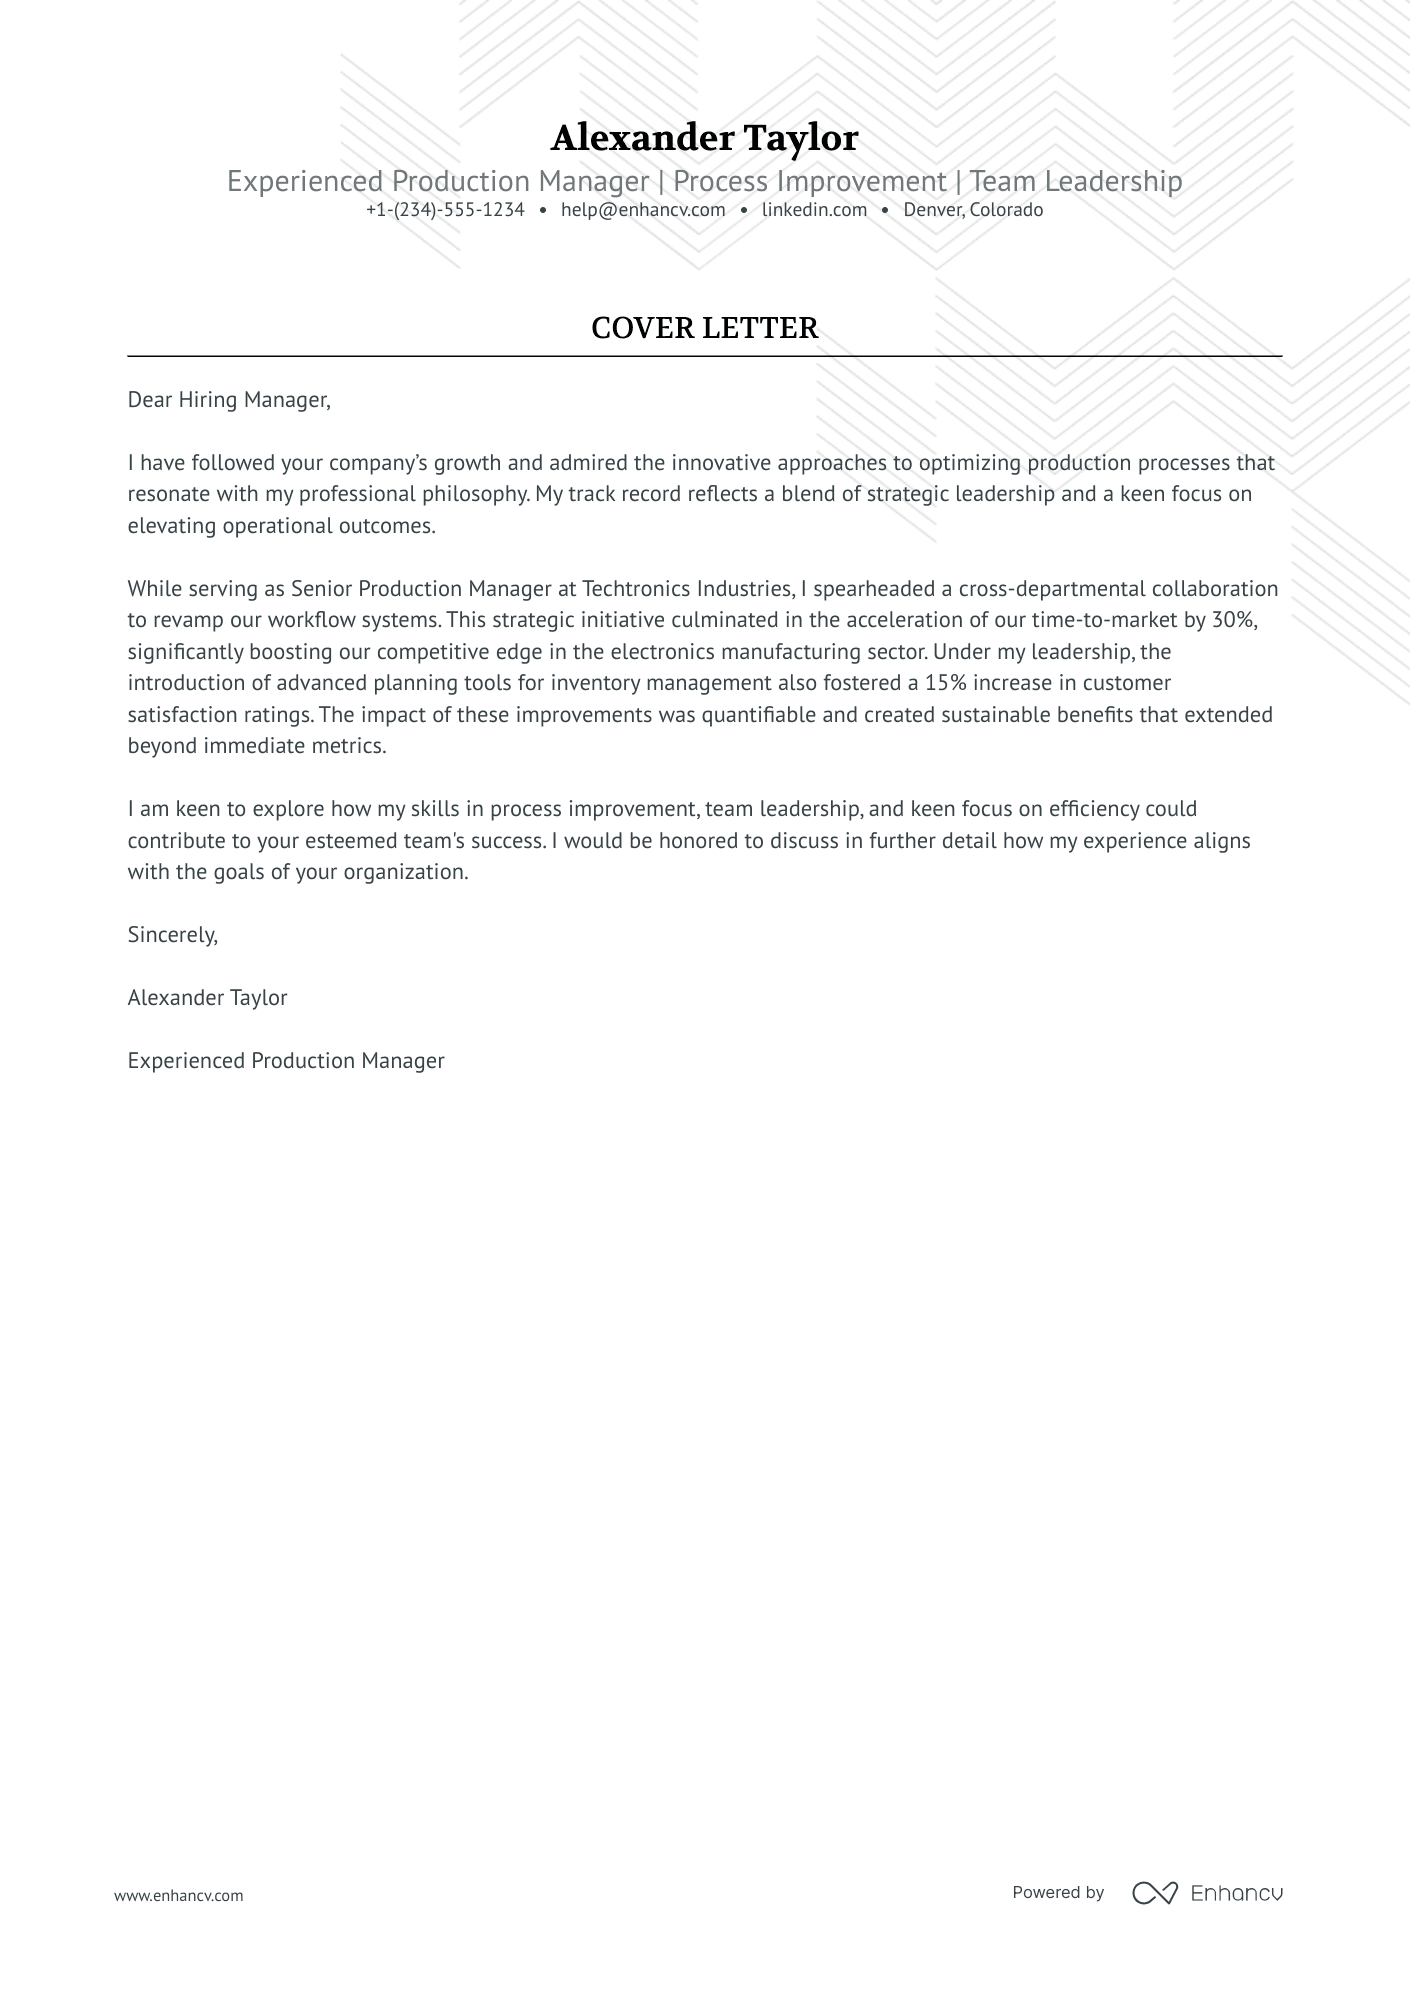 Production Manager cover letter